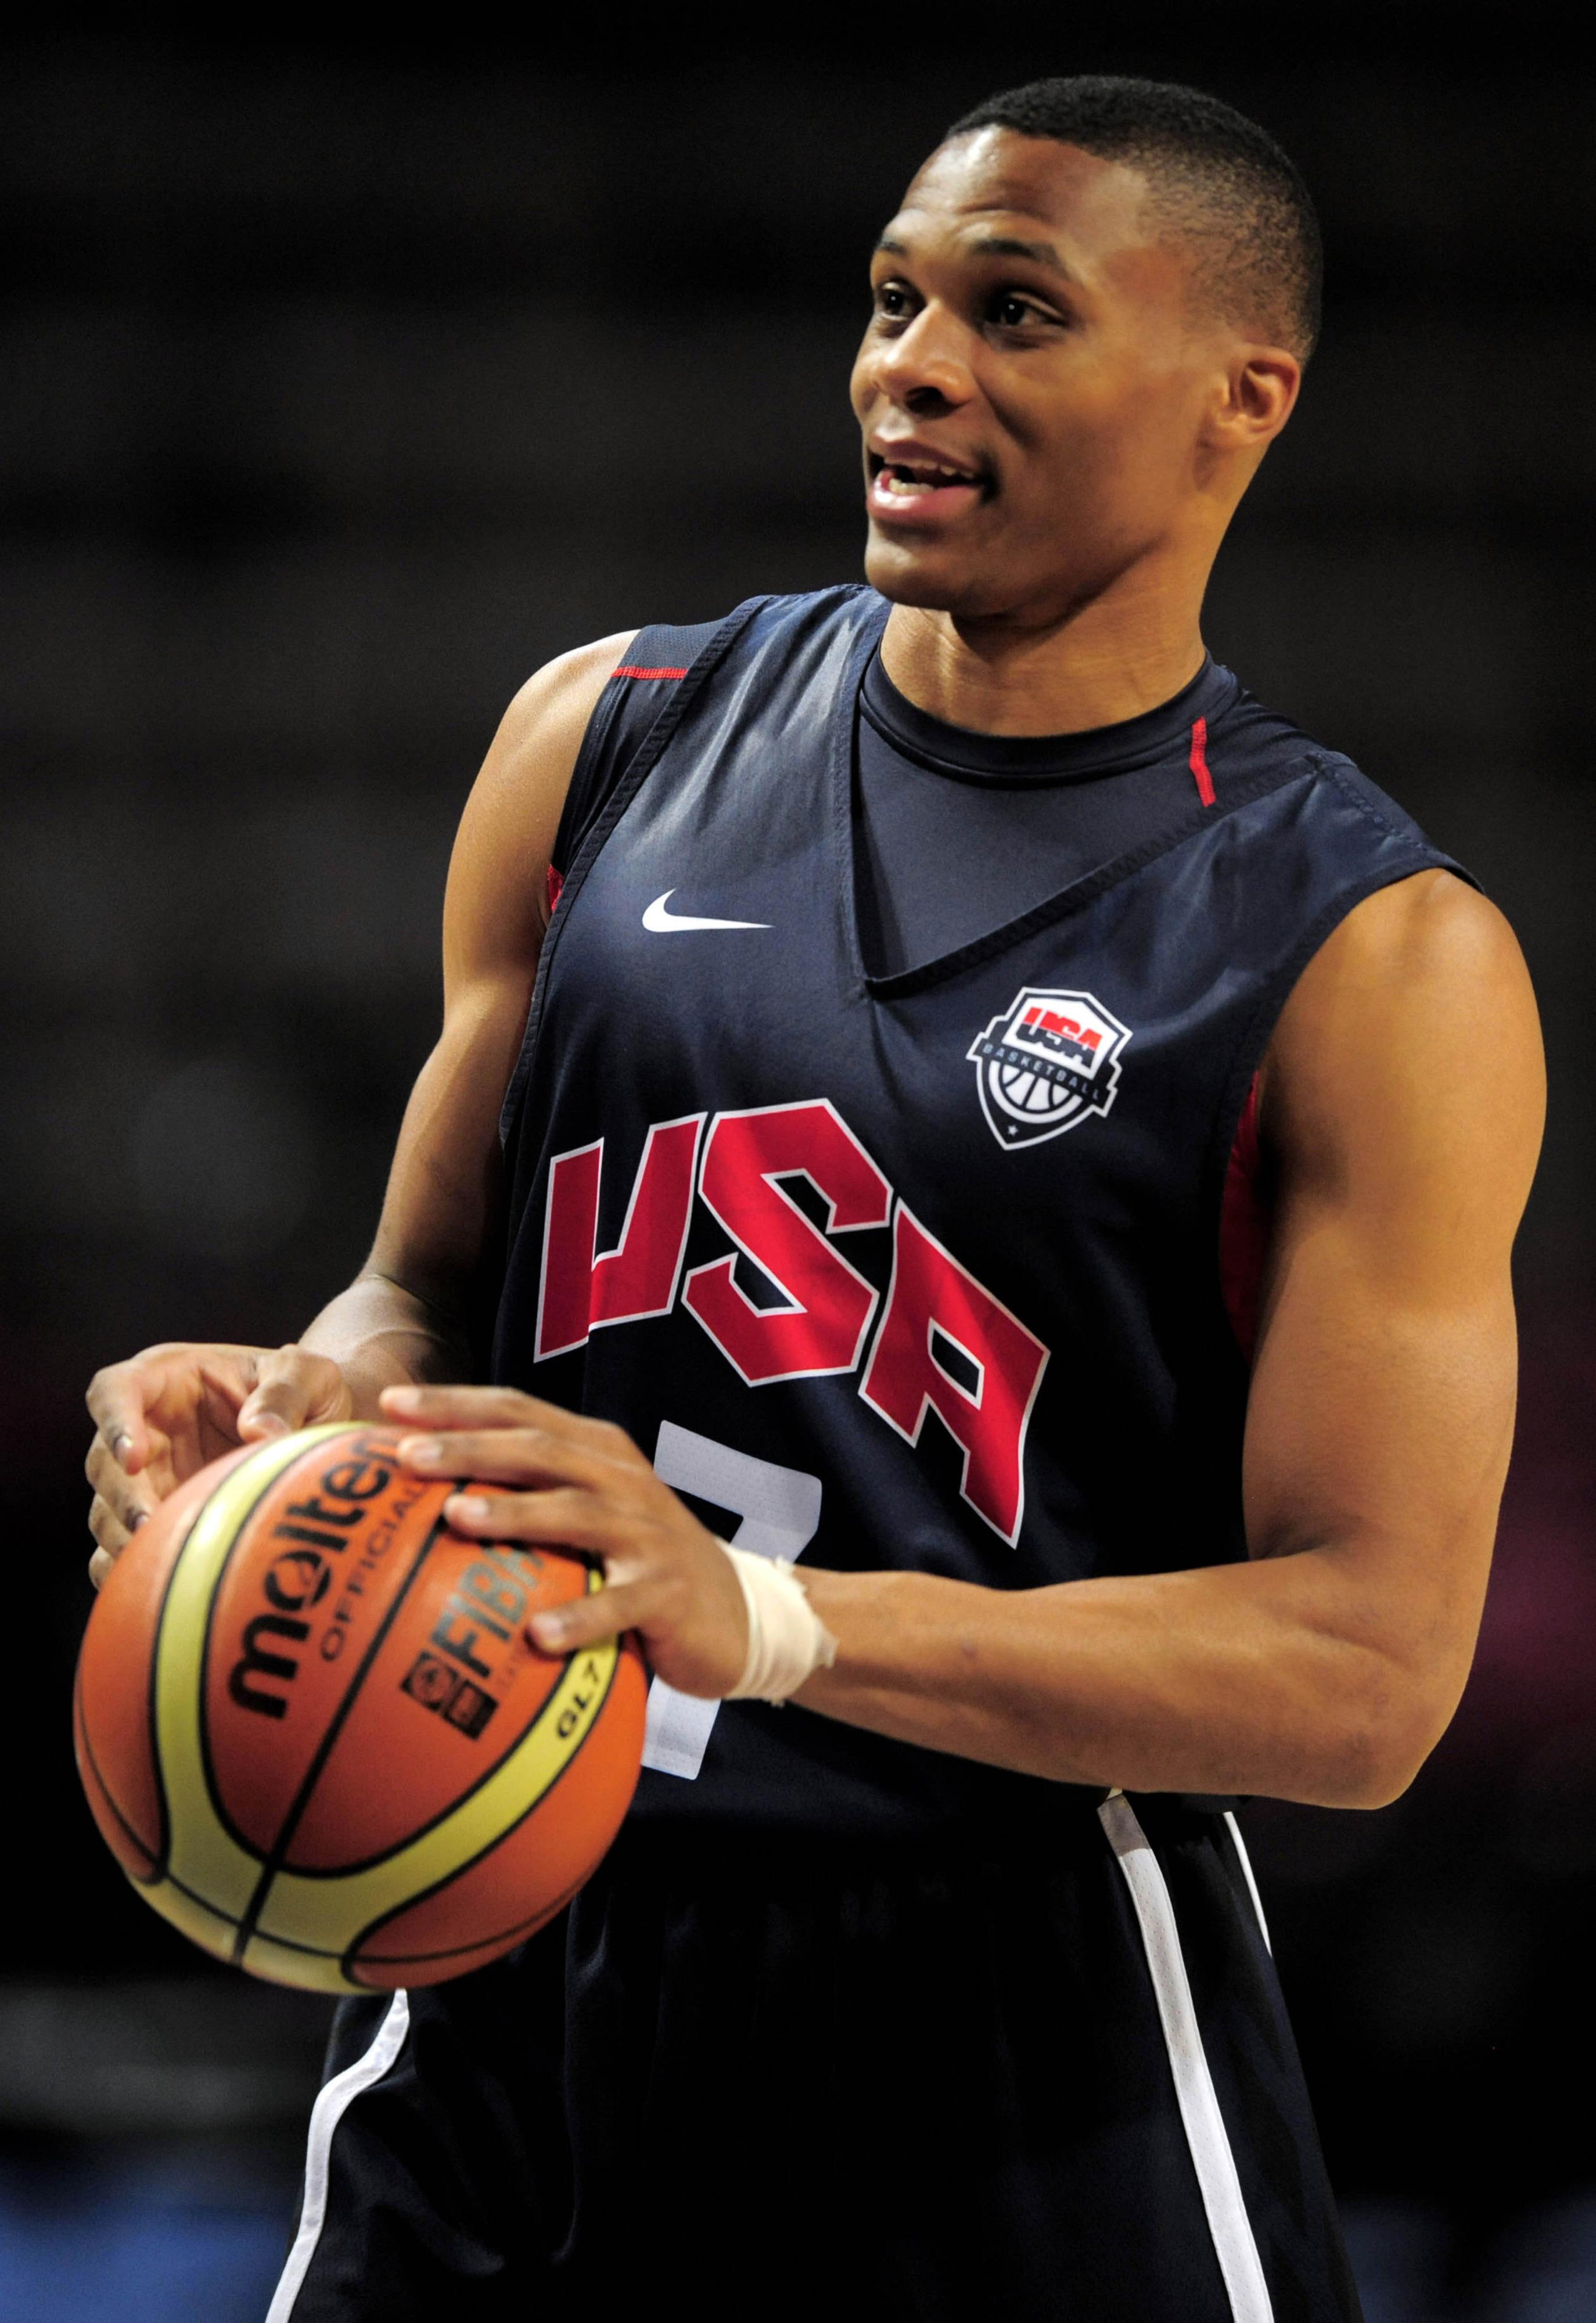 July 18, 2012; Manchester, UNITED KINGDOM; United States guard Russell Westbrook (7) during training for the 2012 London Olympic Games warm-up match against Great Britain at the Manchester Evening News Arena.  Mandatory Credit: Joe Toth-US PRESSWIRE